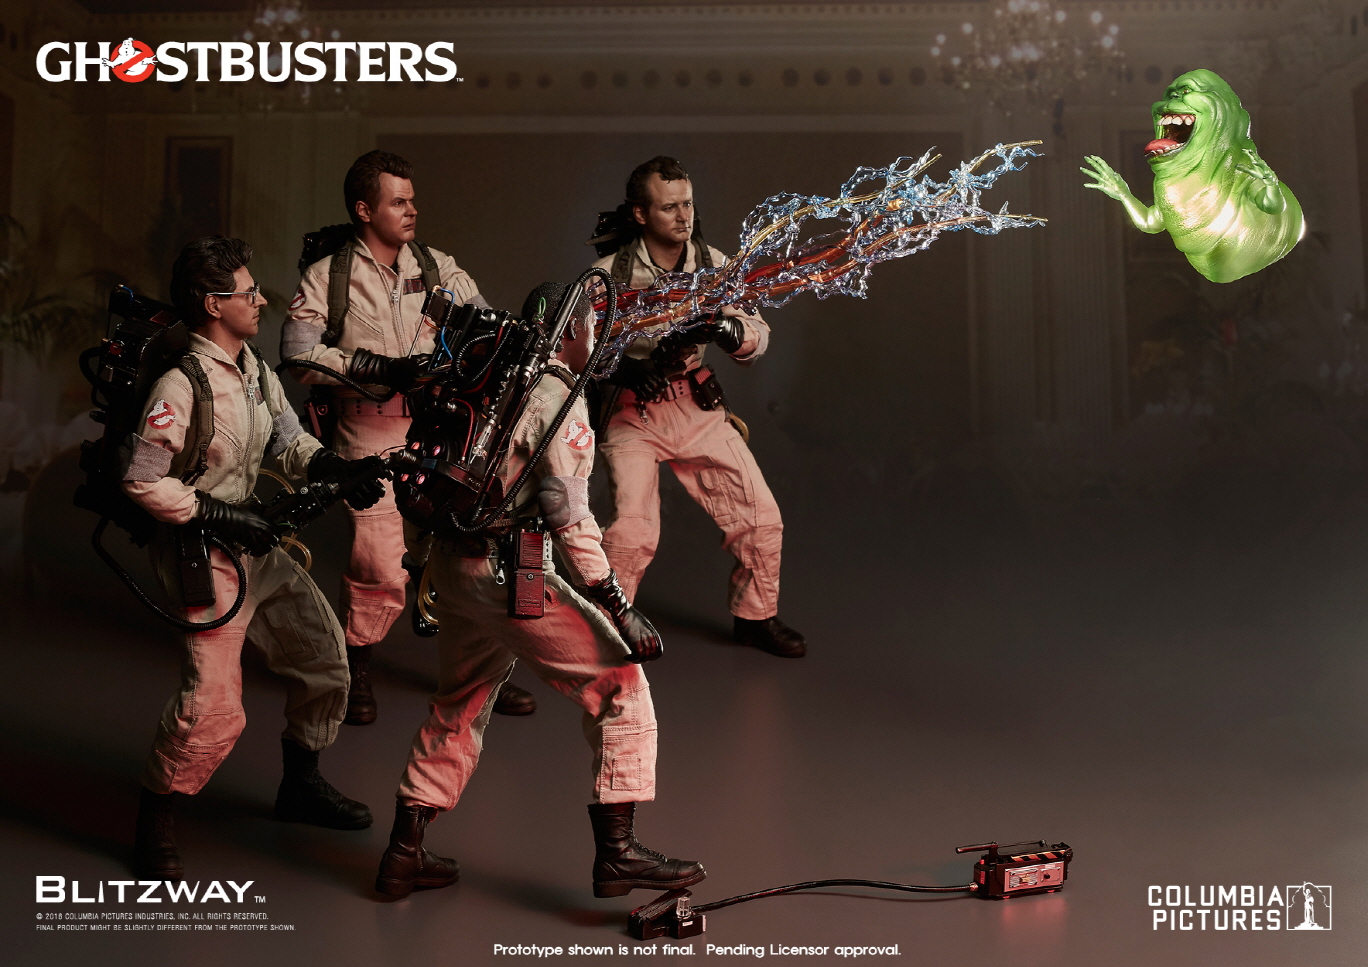 Blitzway Ghostbusters - Exclusive 4 Pack